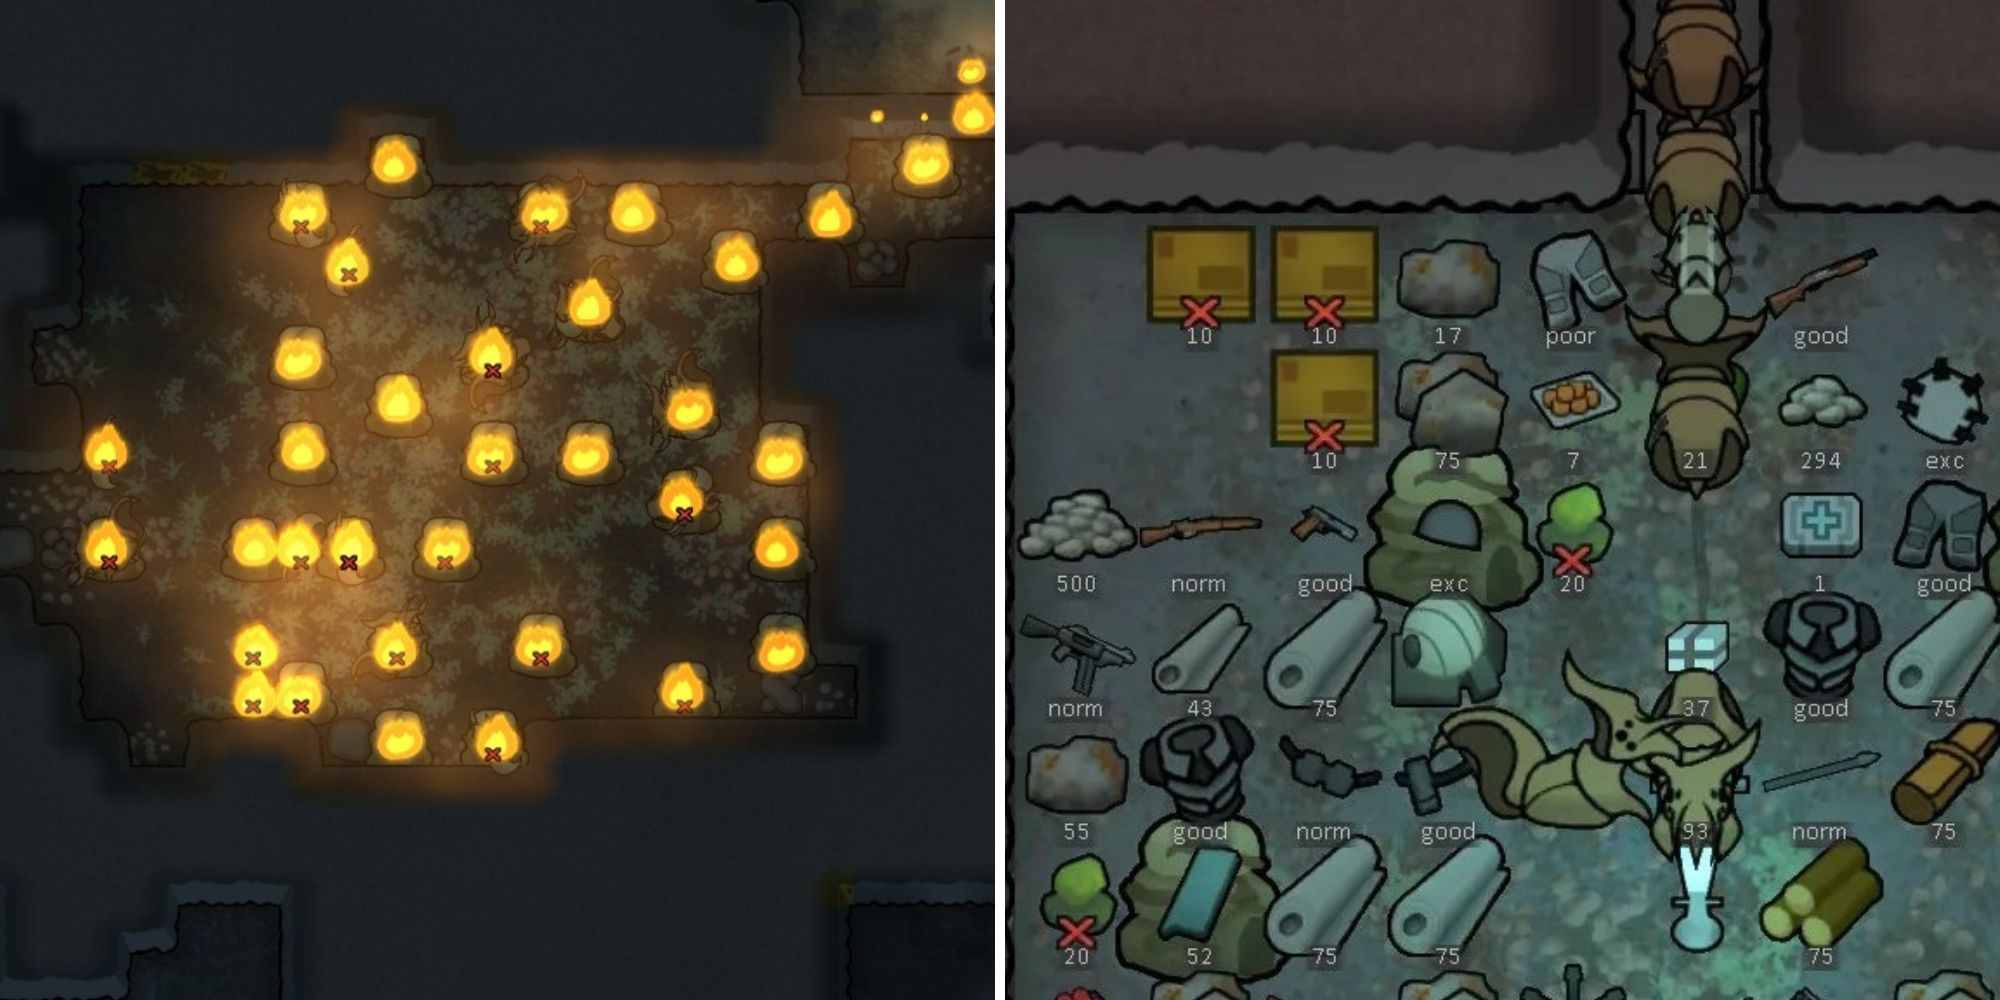 On the right is fire caused by a Molotov and on the left is an image of a variety of weapons and armor on the ground in RimWorld